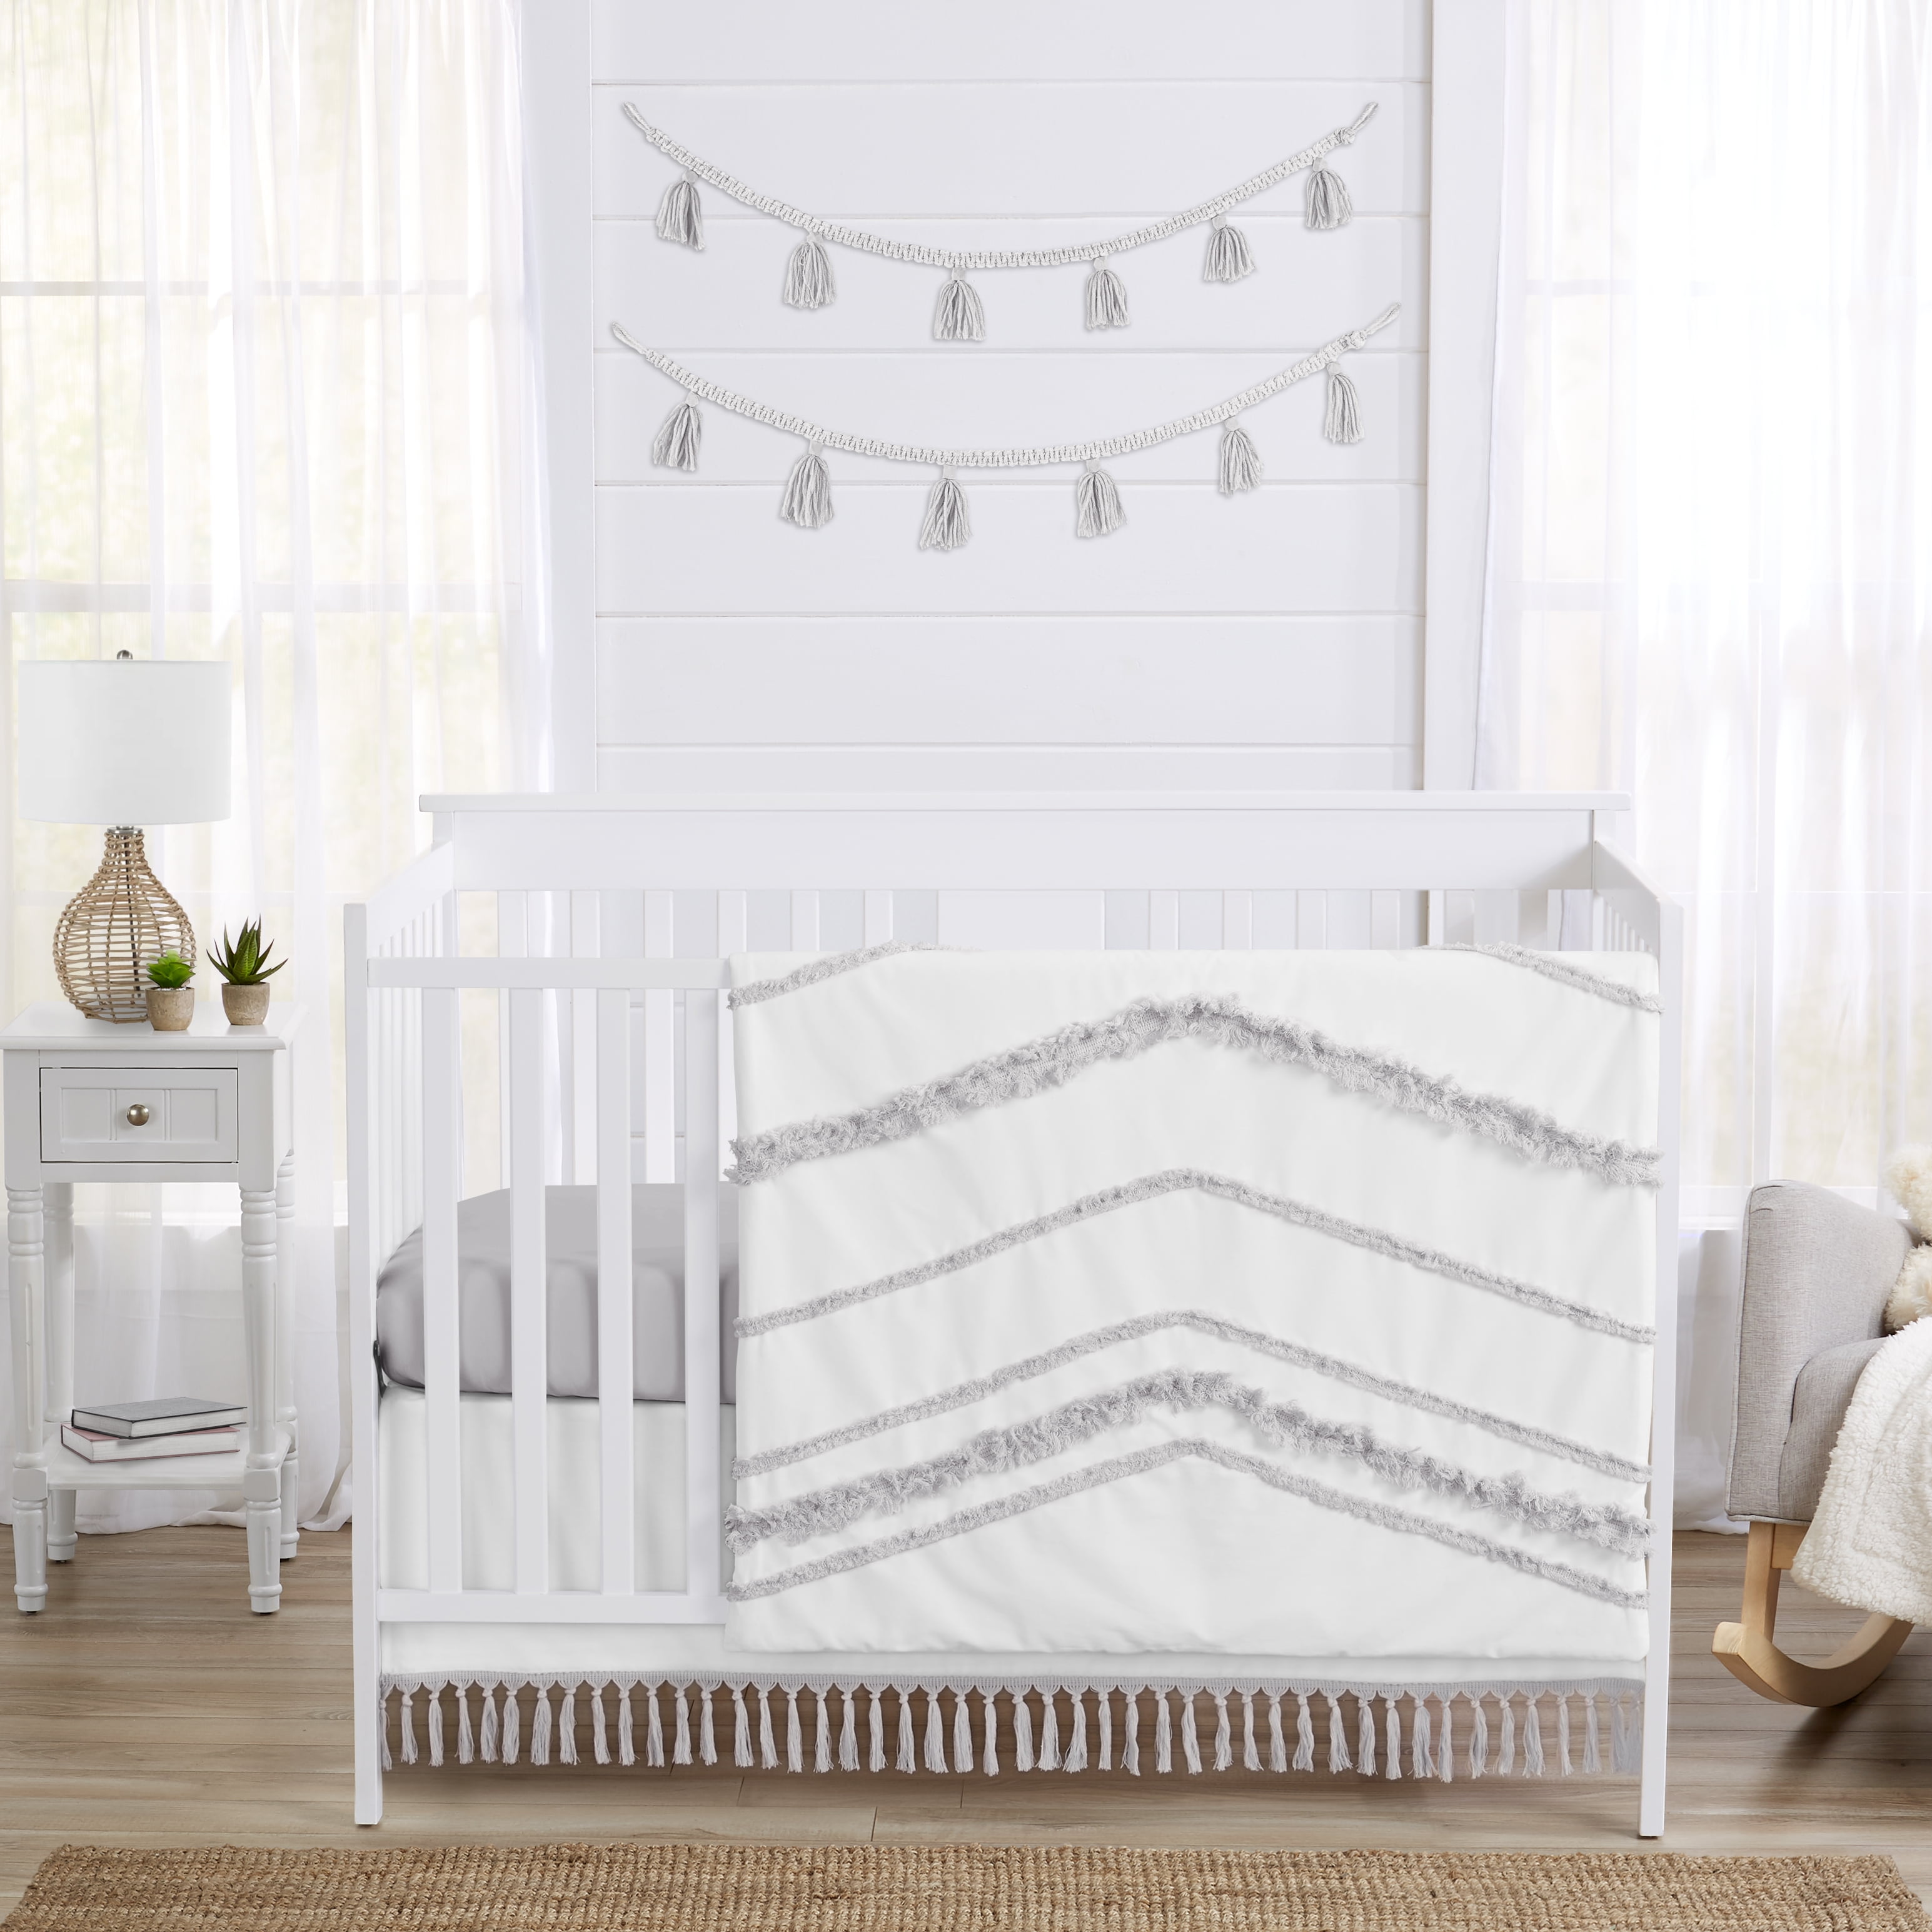 lux 8 pcs CRIB BEDDING SET TEDDY EMBROIDERY all round bumper/canopy/fitted sheet 